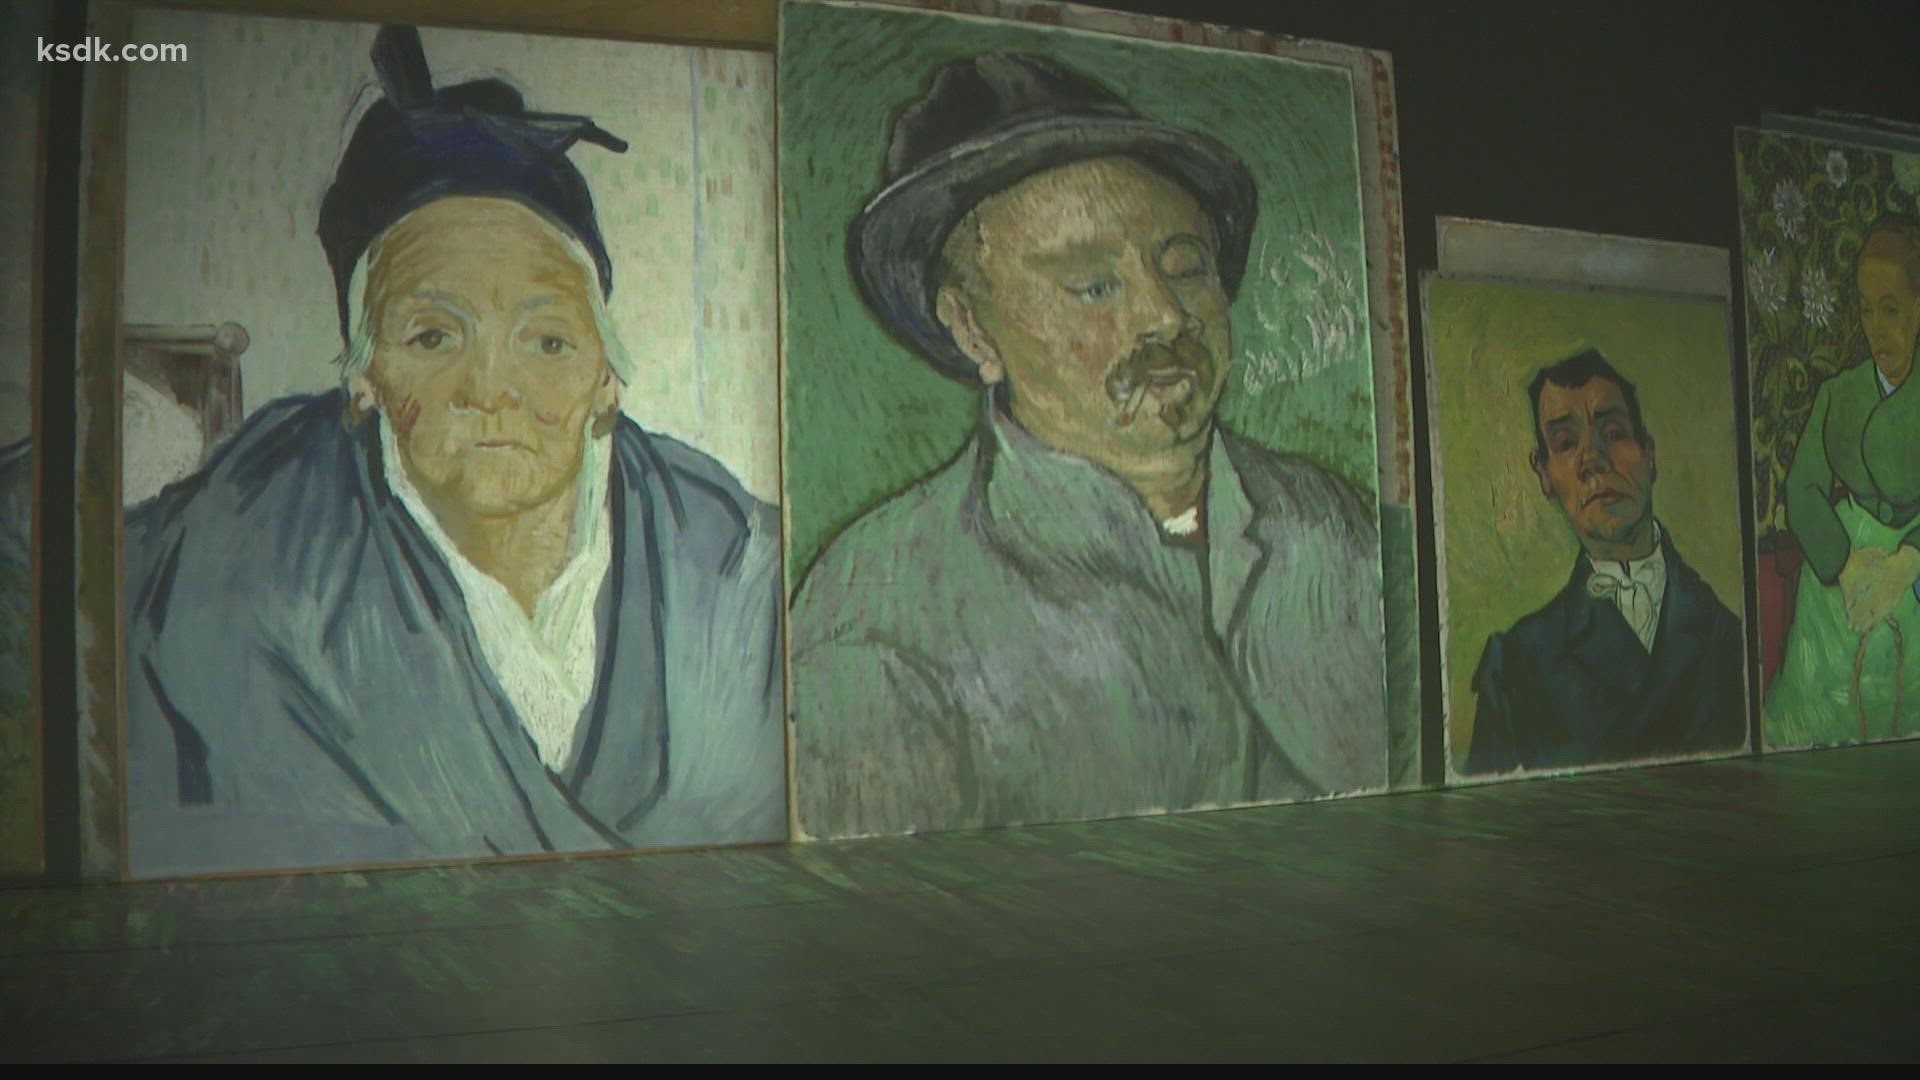 Due to high demand, the immersive experience of Van Gogh’s paintings will be at the Saint Louis Galleria through Jan. 2.